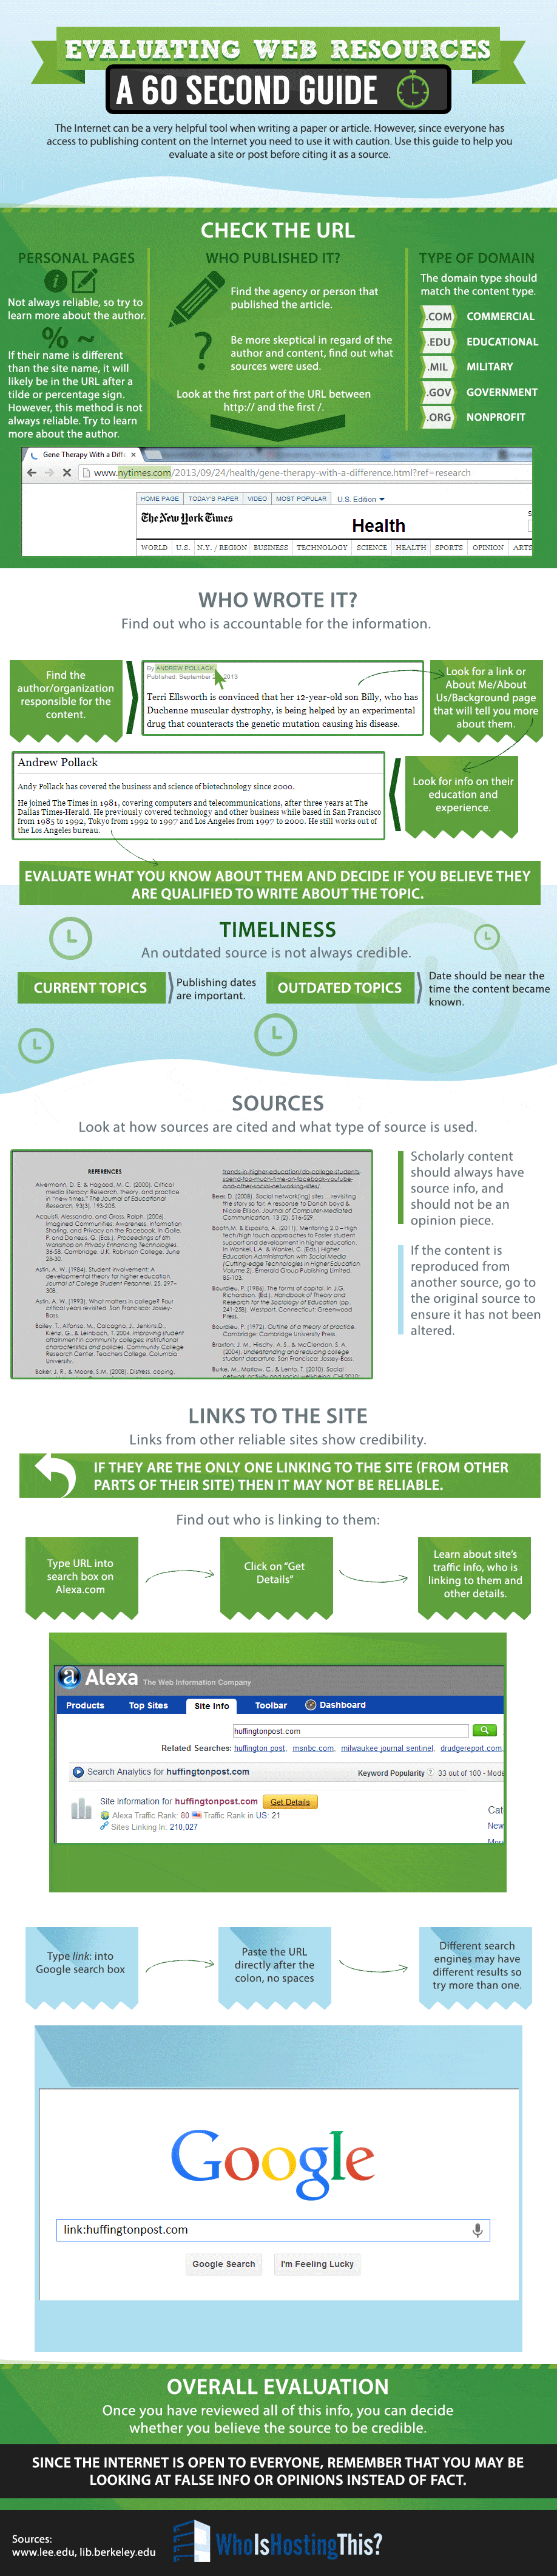 How to Evaluate Web Resources Infographic